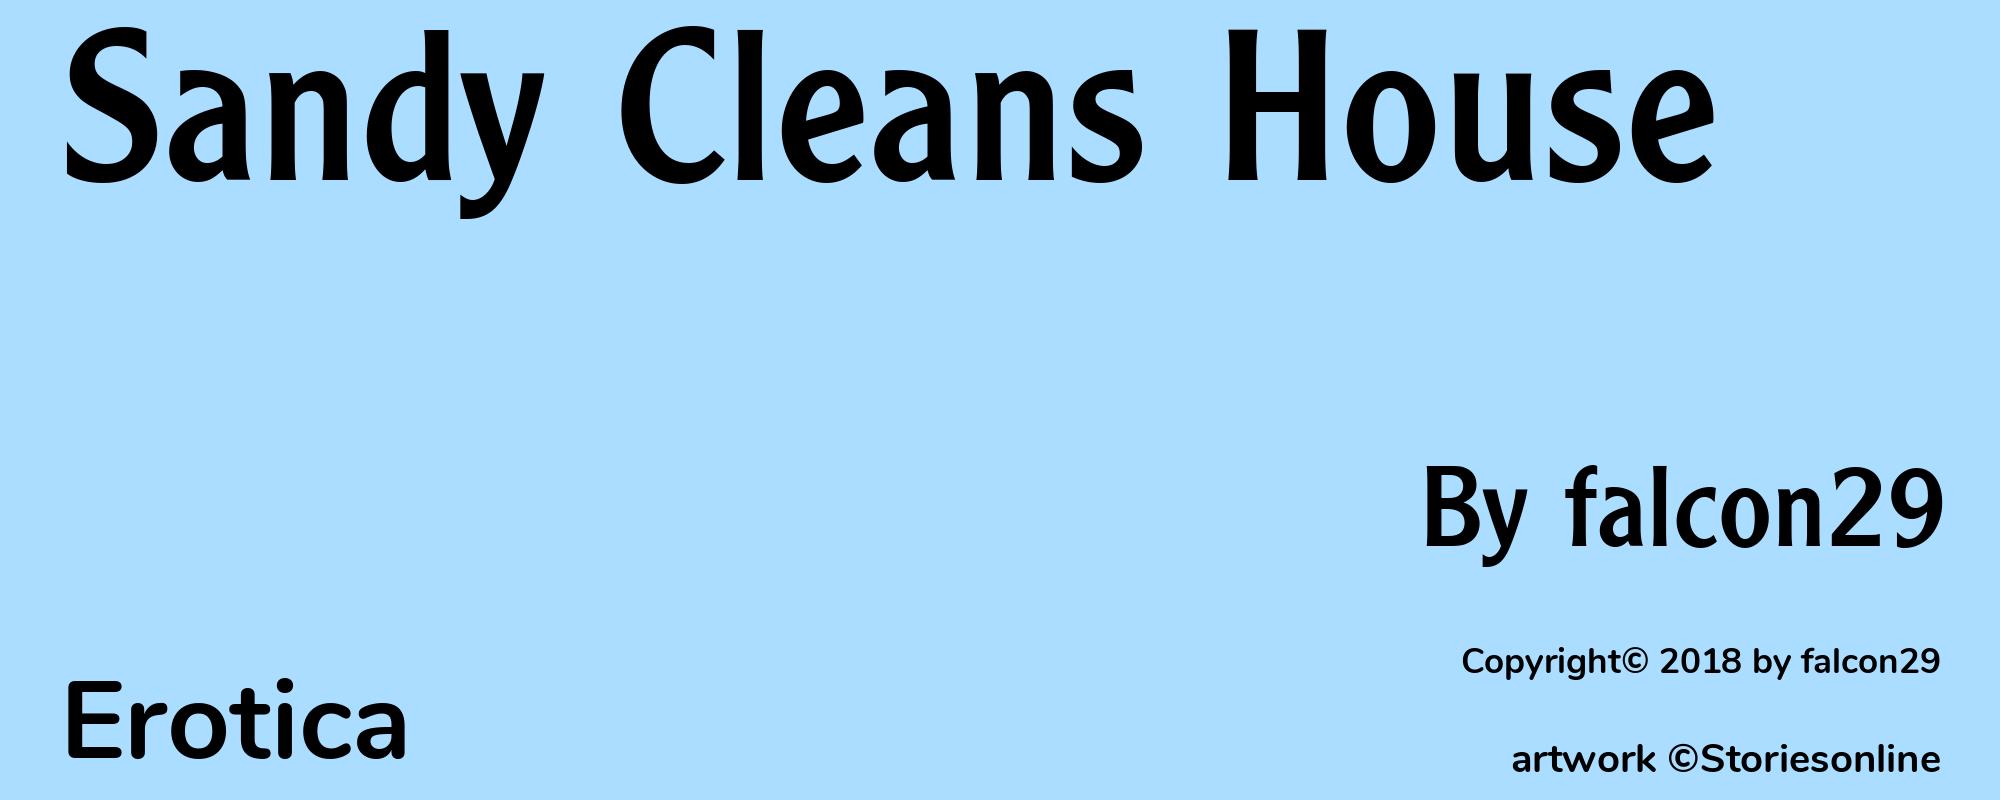 Sandy Cleans House - Cover